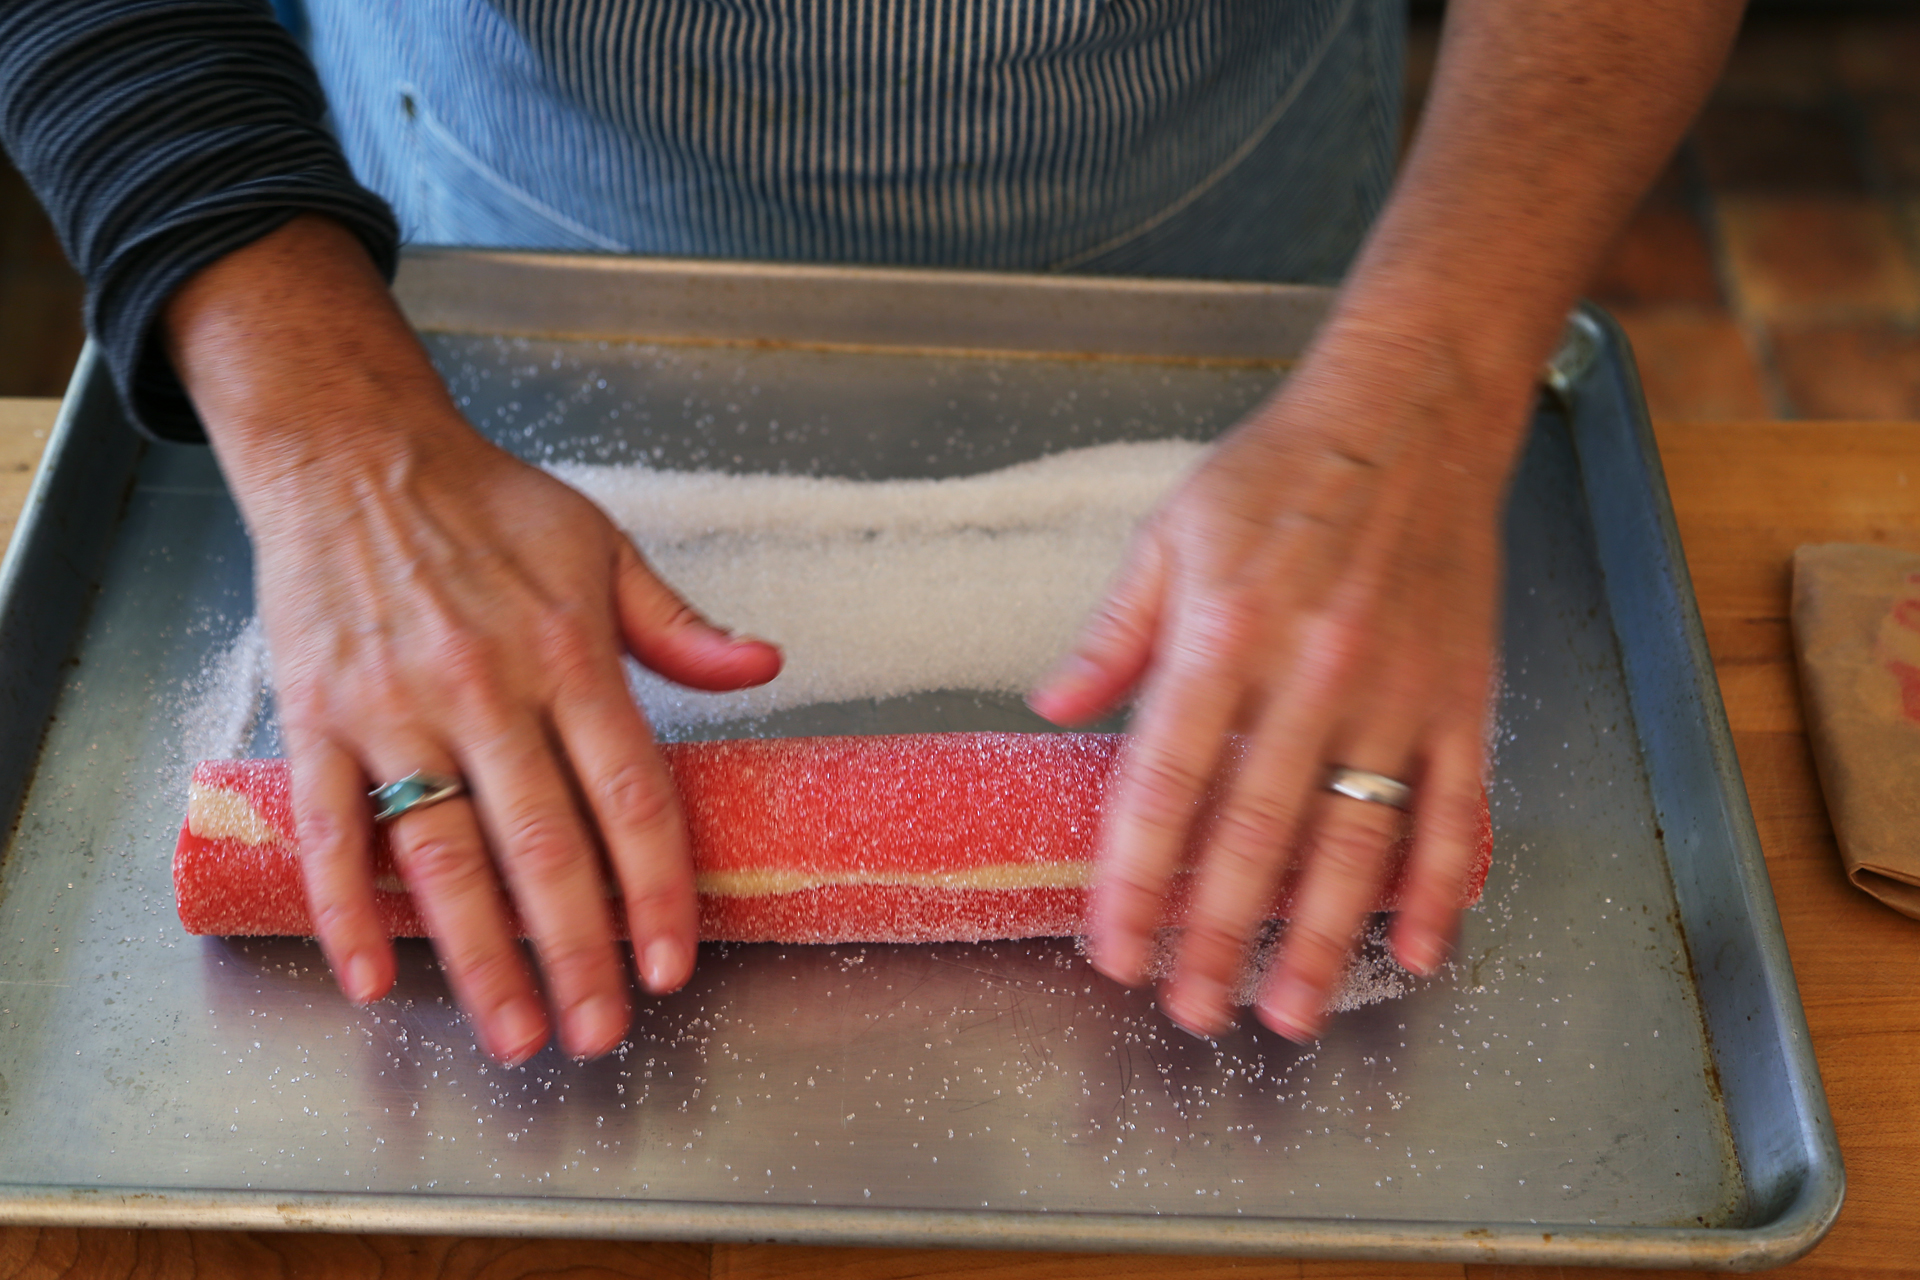 Roll the log in the sparkle sugar, pressing slightly to make sure it adheres to the dough.